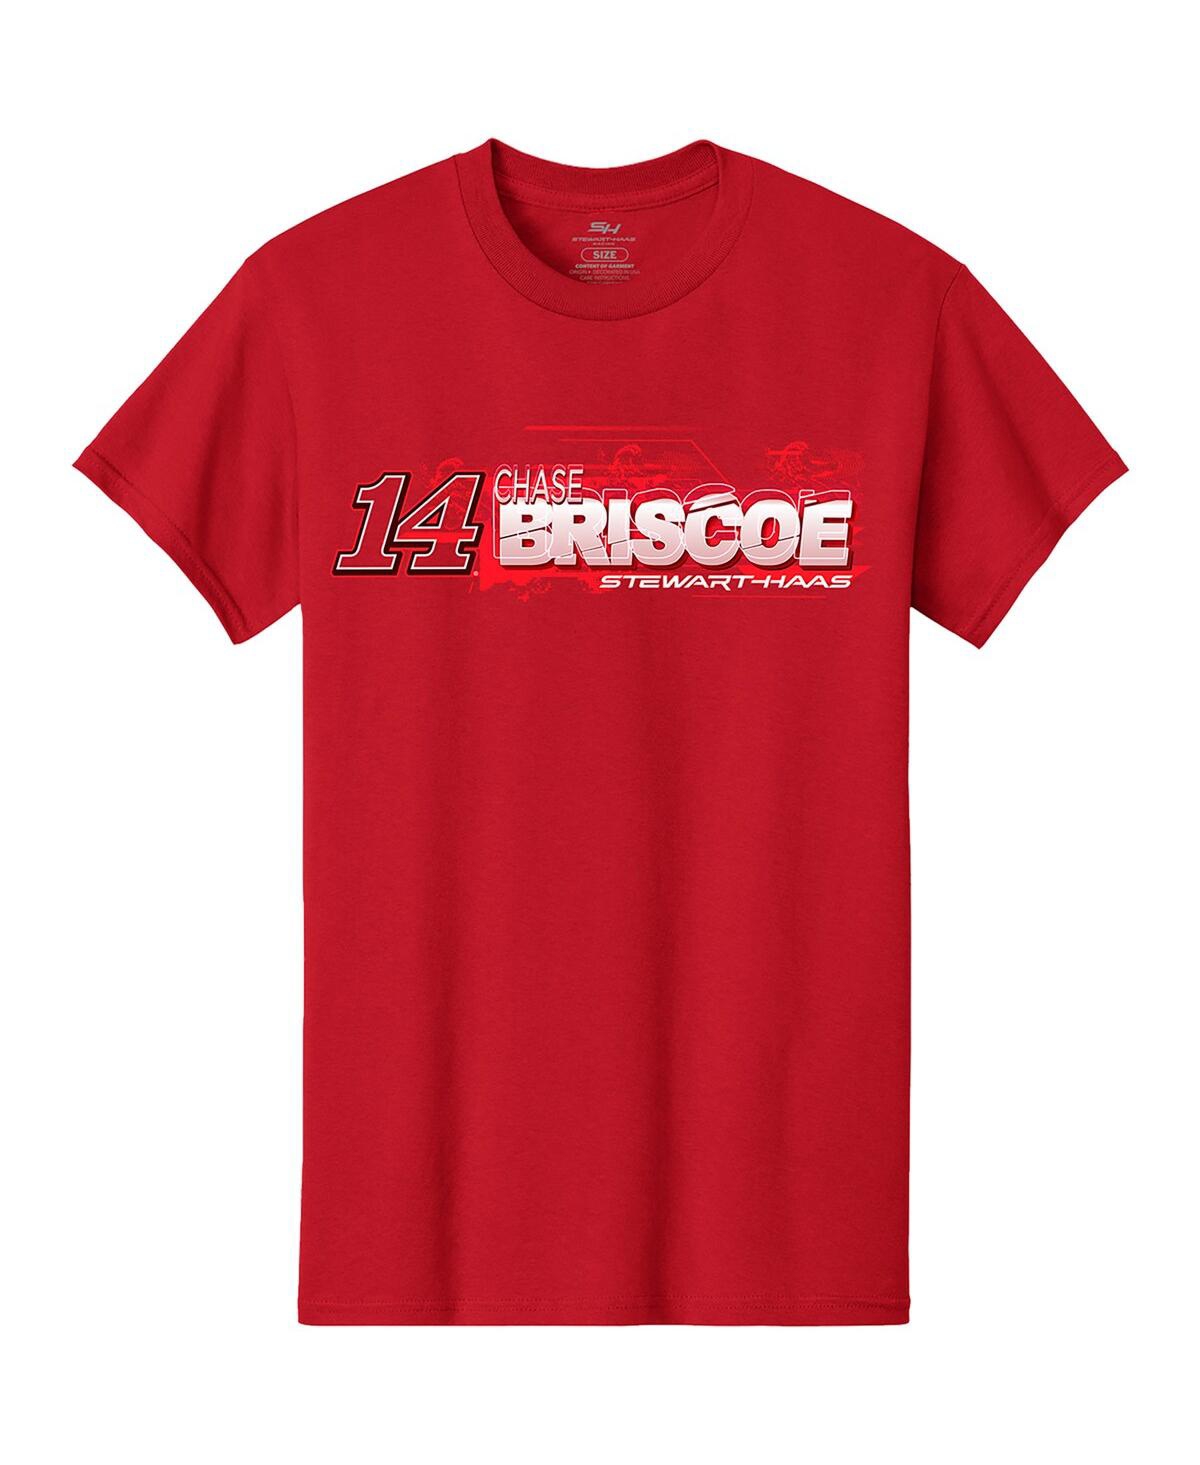 Shop Stewart-haas Racing Team Collection Men's  Red Chase Briscoe Car T-shirt